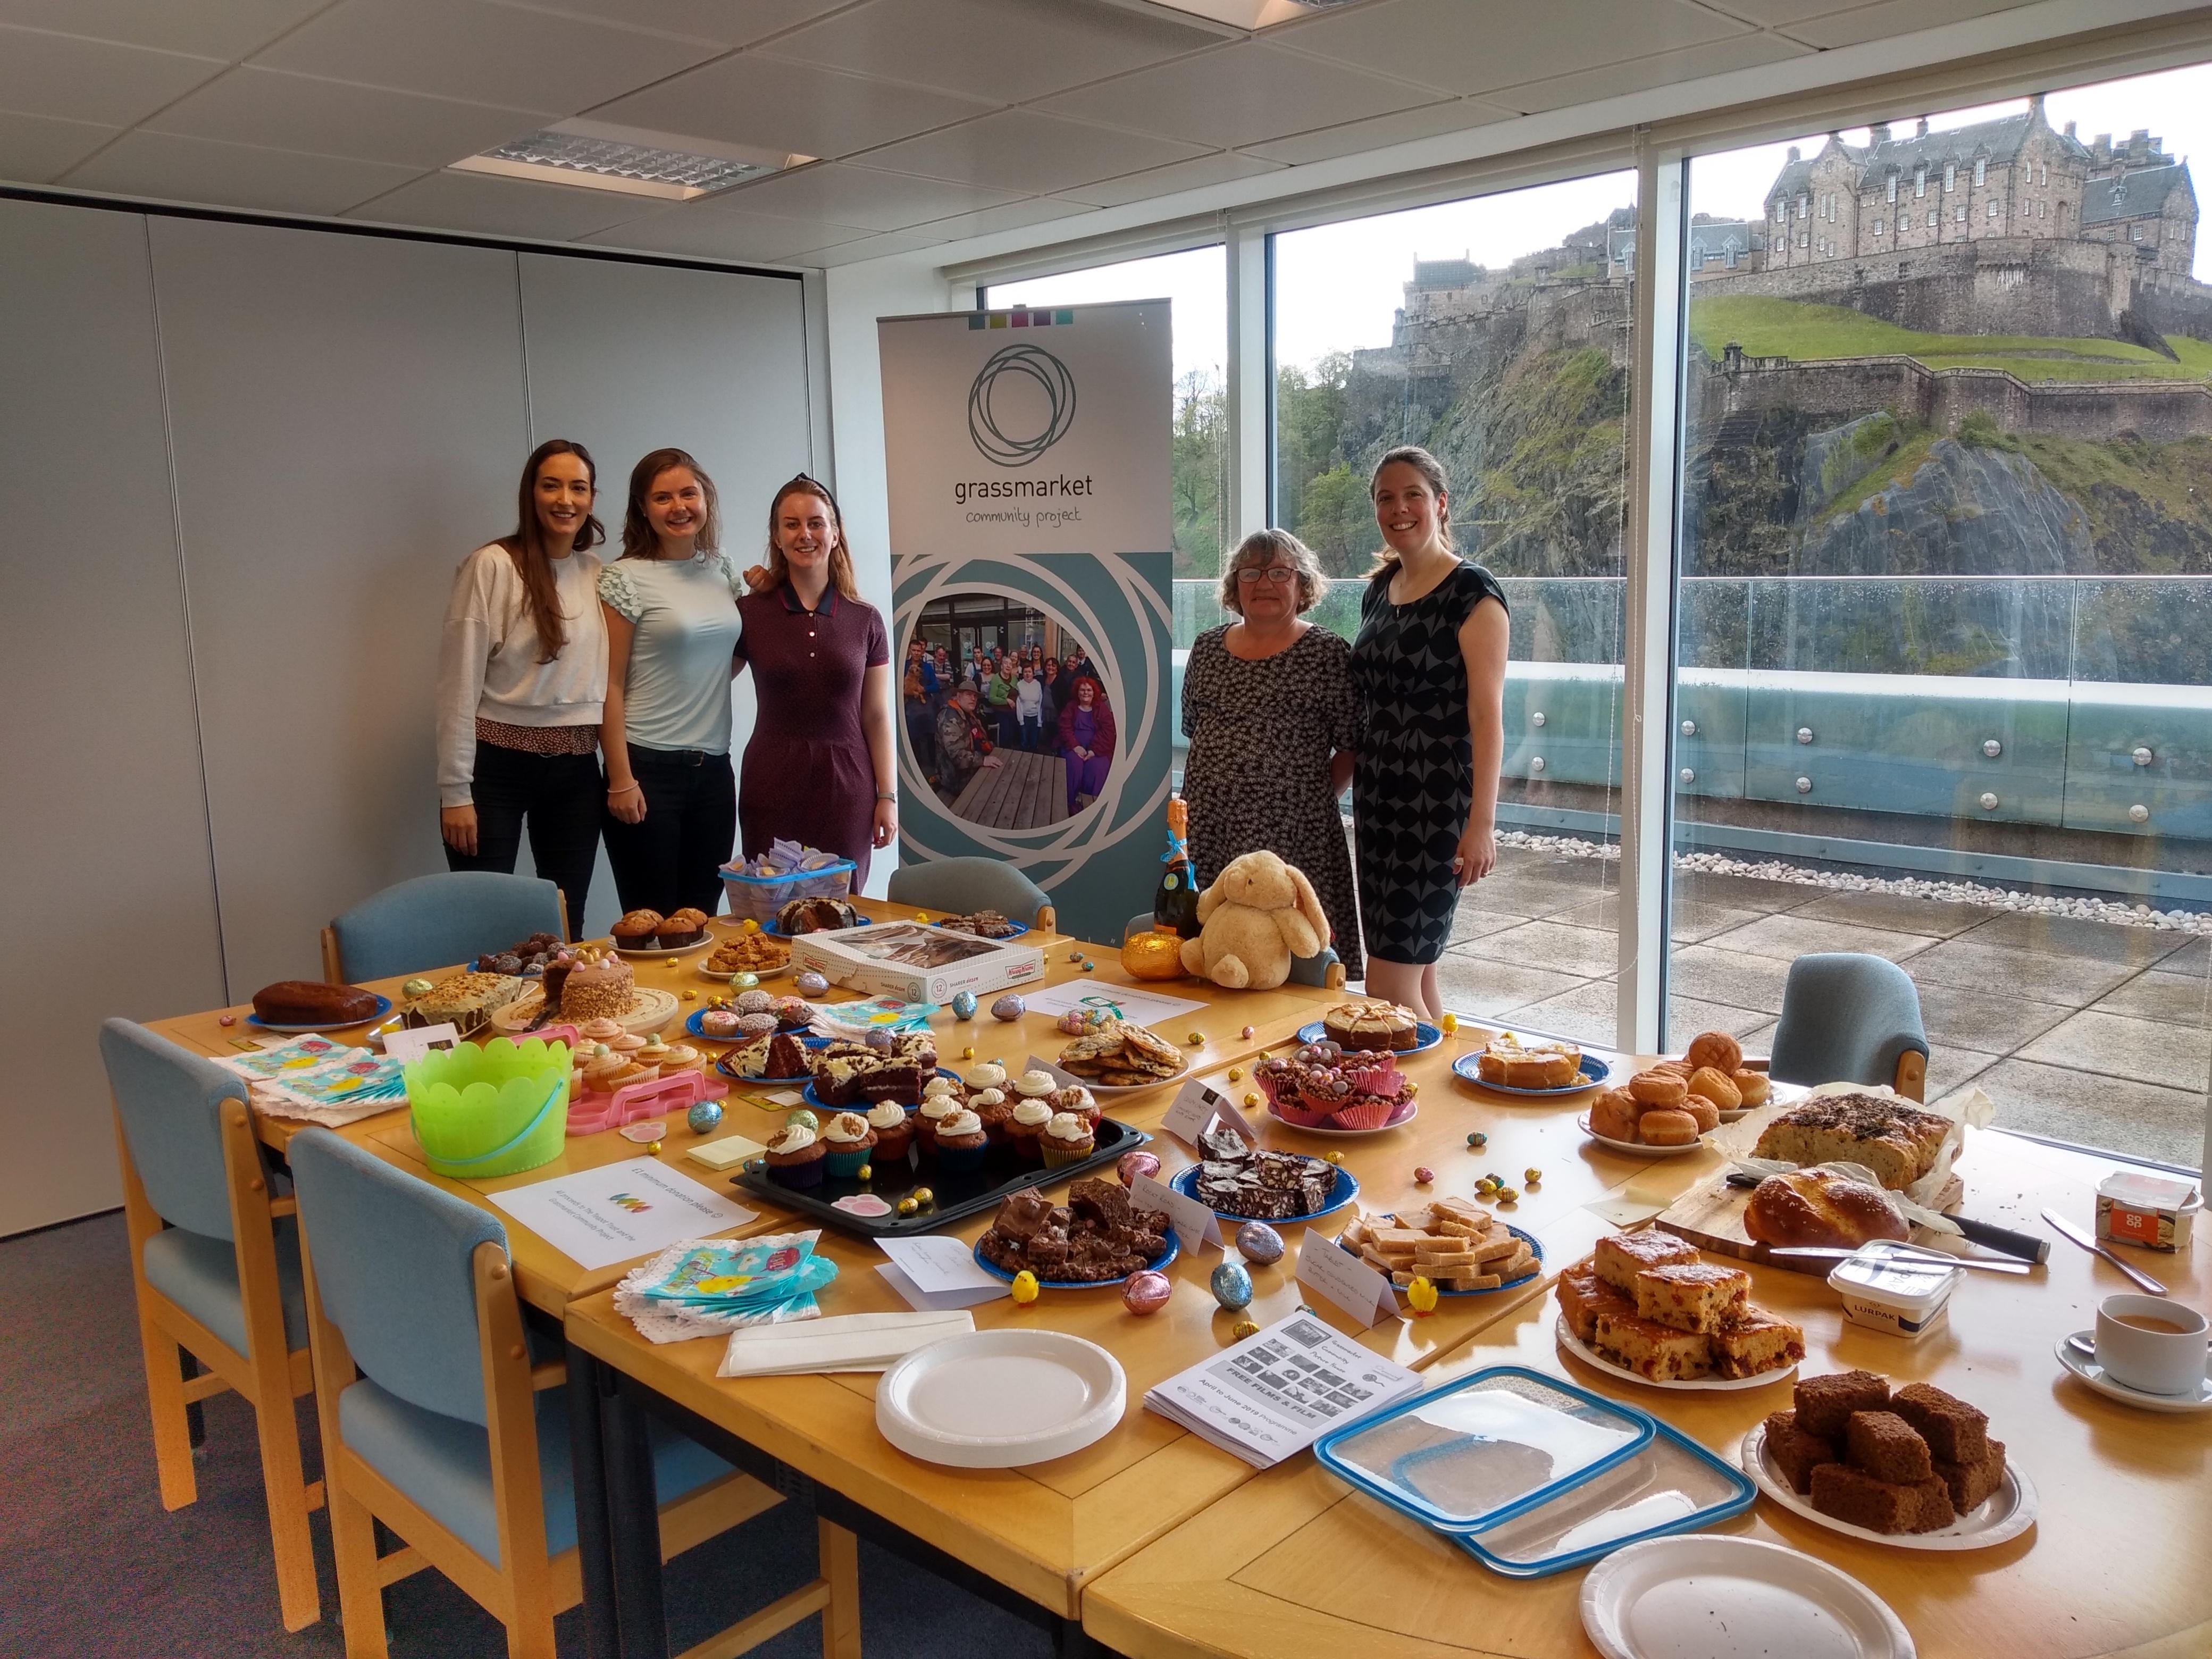 In pictures... MBM Commercial raise charity cash at Easter bake sale